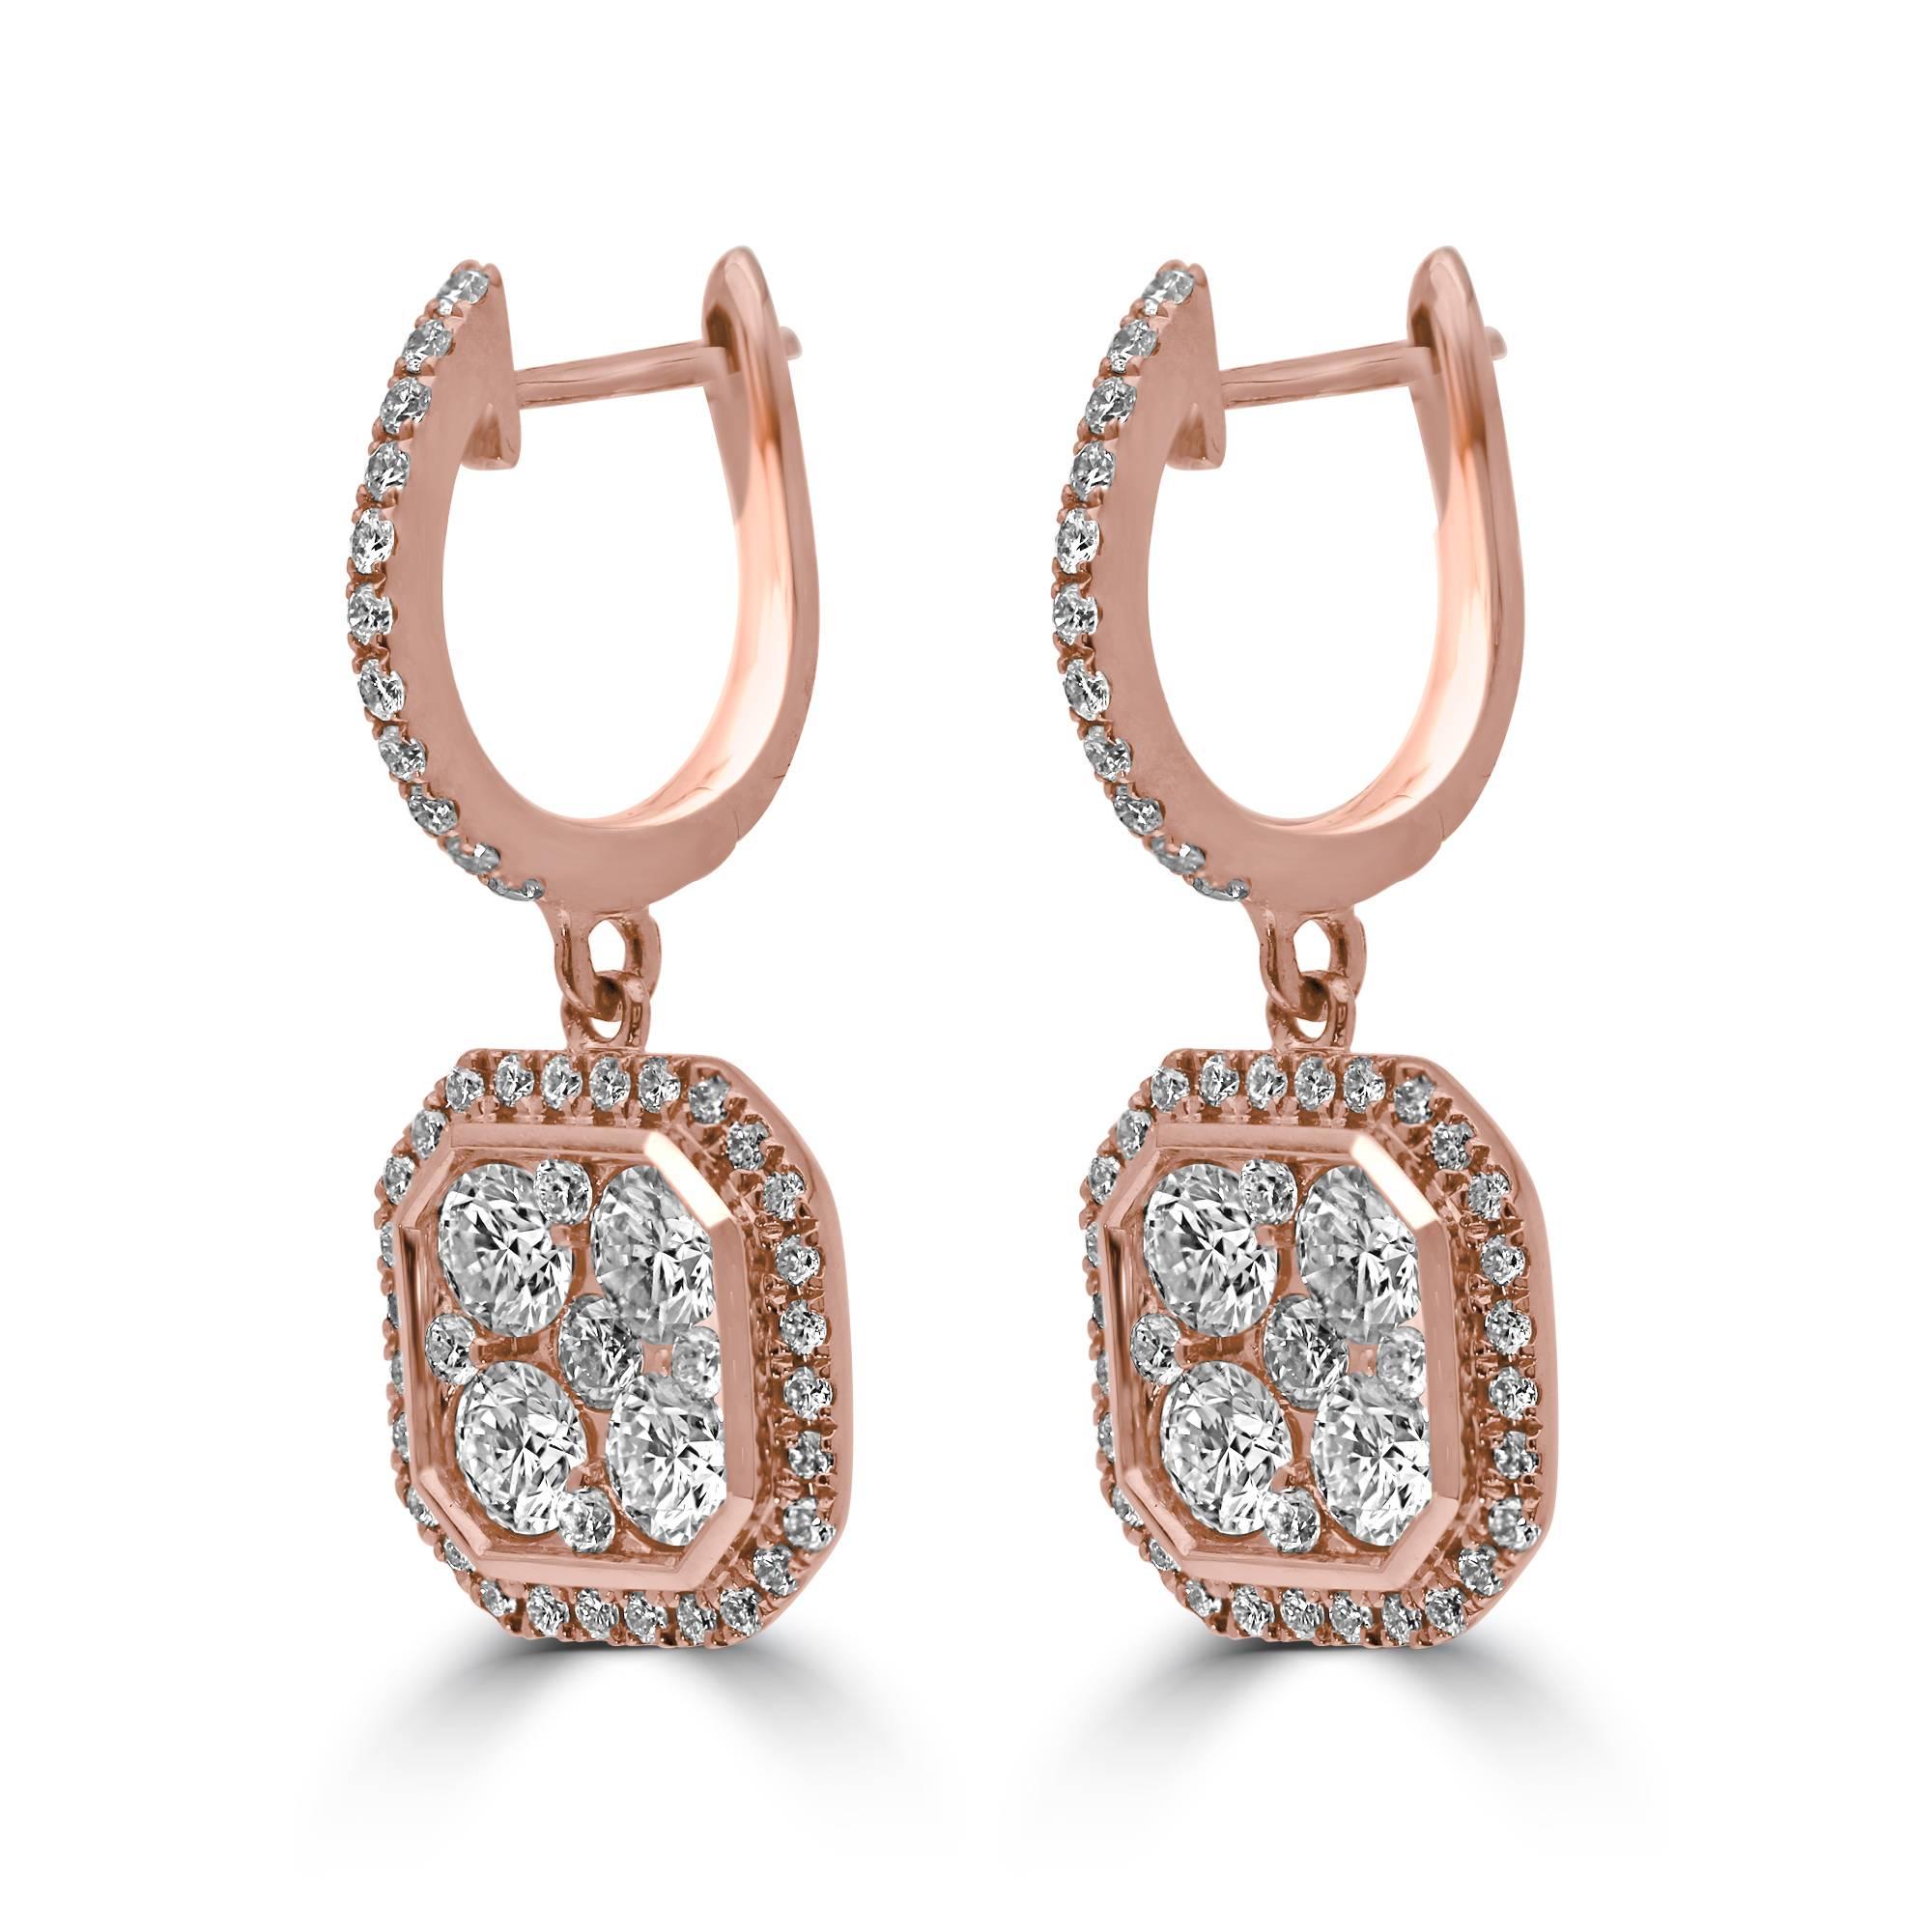 A classic cluster octagonal dangling diamond earrings.
1.50ct round brilliant cut diamonds mounted in 18Kt rose gold.
Matching pendant is available.
Contact us for more information.